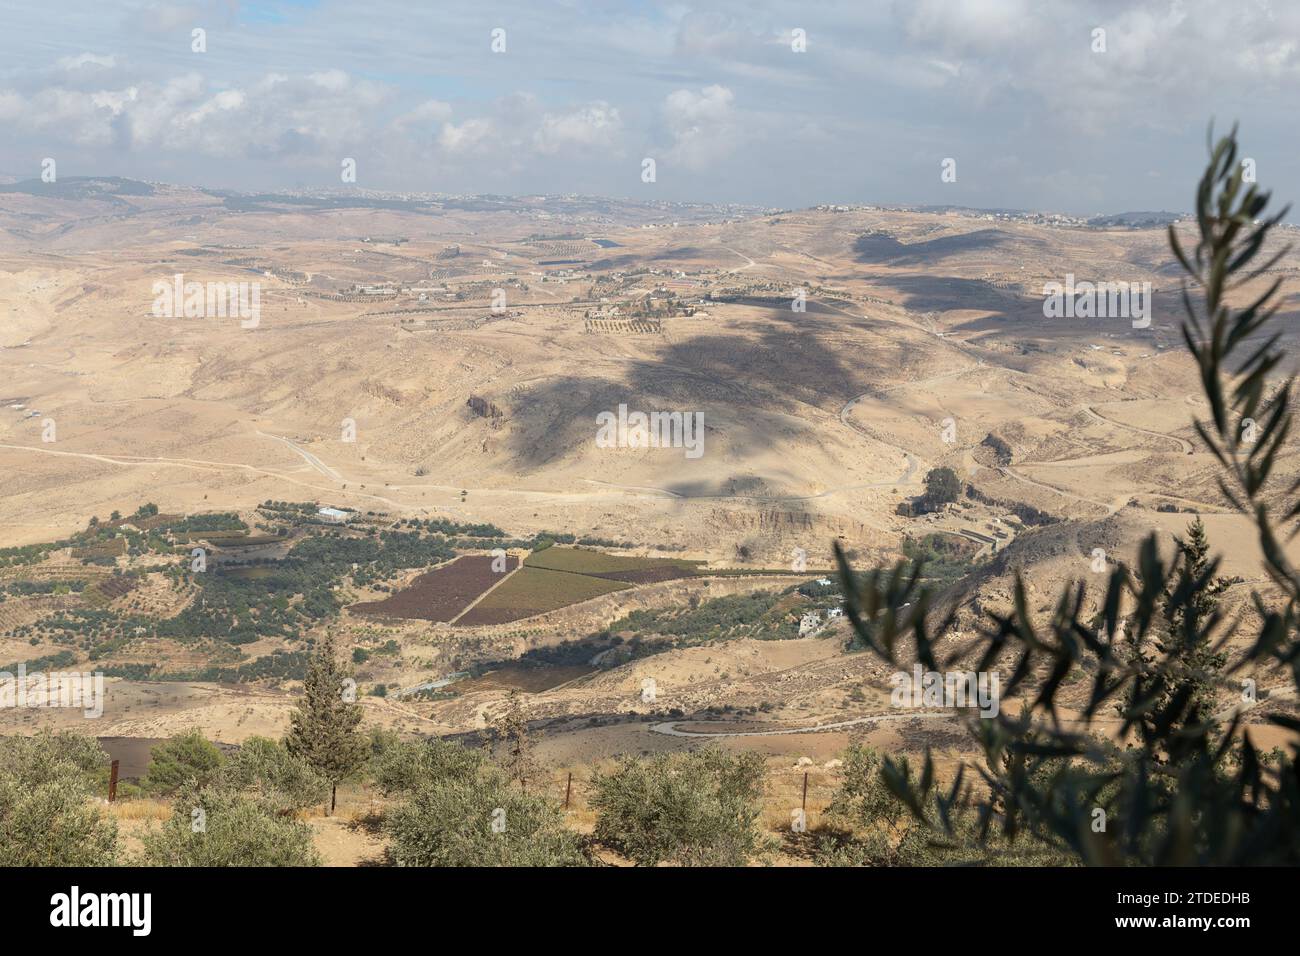 View of agricultural fields from Mount Nebo, Jordan Stock Photo